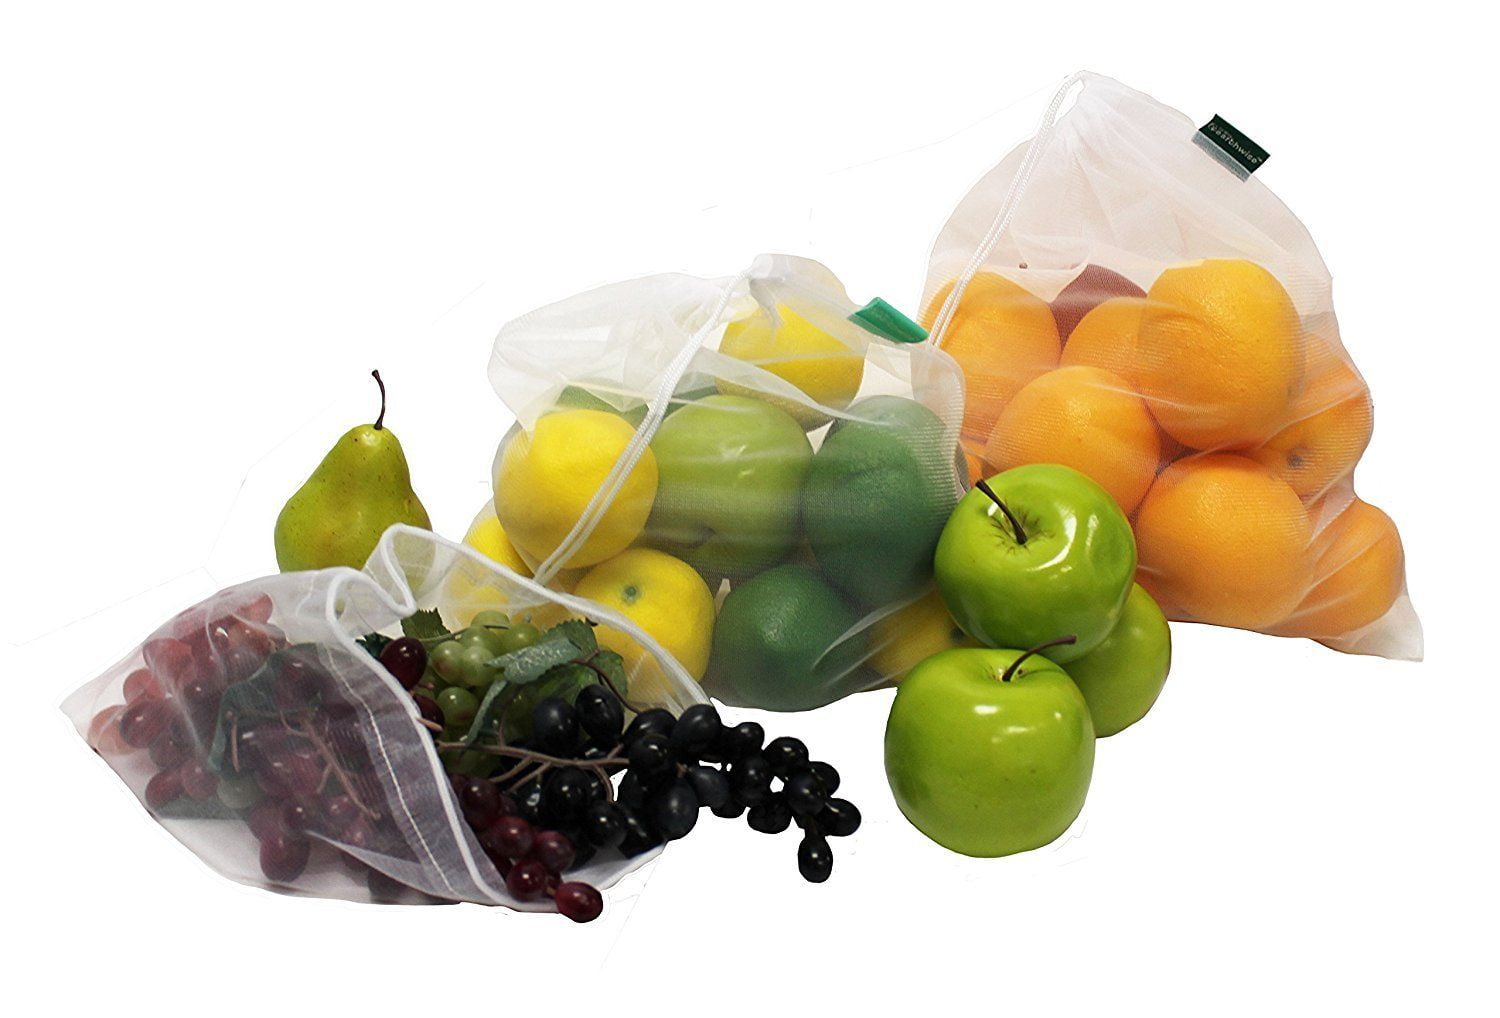 Earthwise Reusable Mesh Produce Bags - SEE-THROUGH - Set of 9 - ULTRA  STRONG LIGHTWEIGHT MESH, Barcodes scan through 12x17in, 12x14in, 12x8in -  Walmart.com